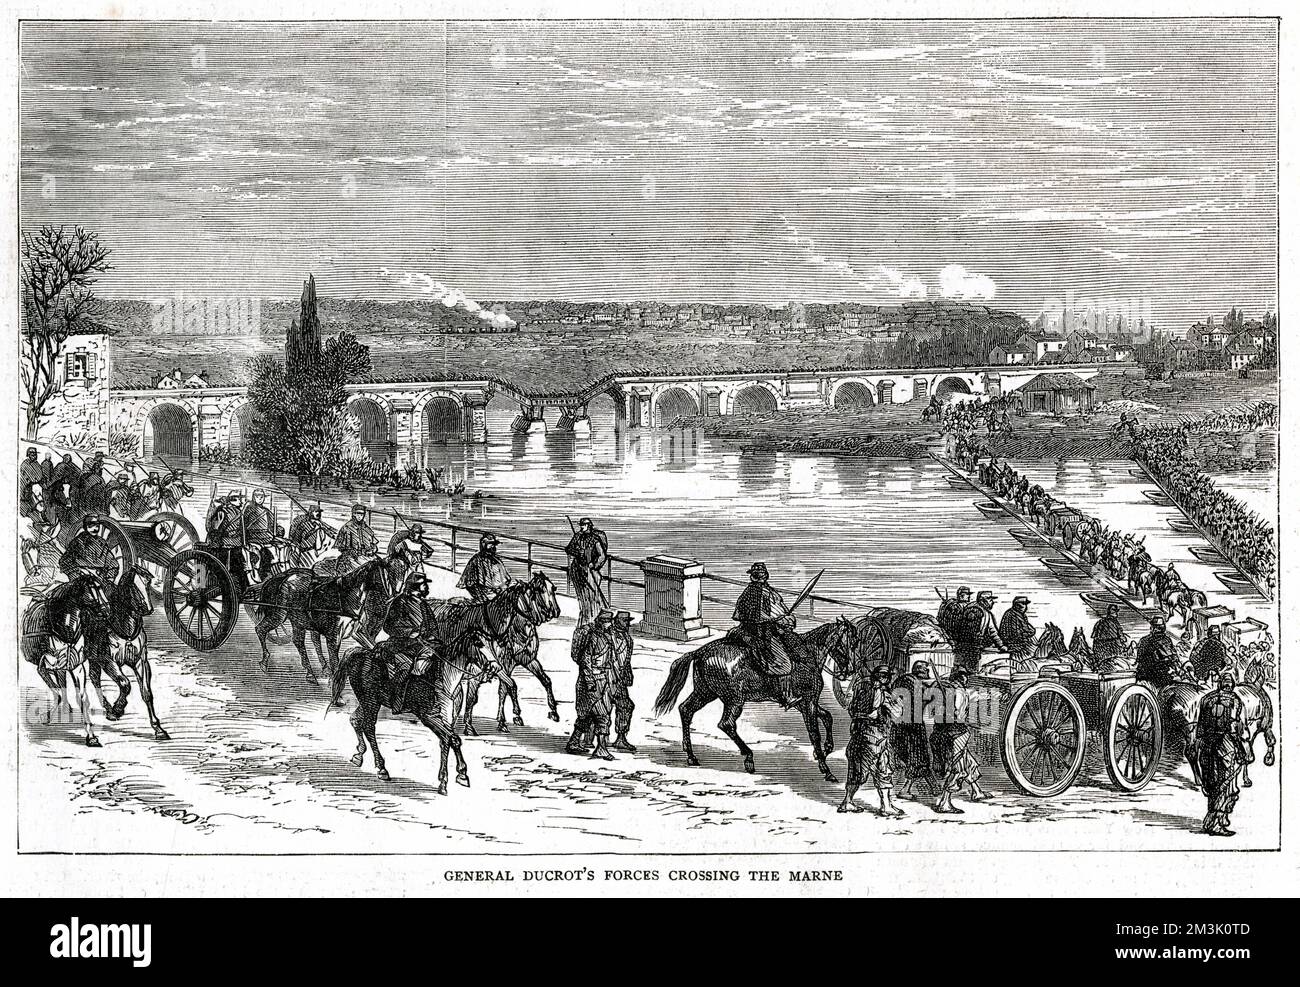 French troops, under the command of General Ducrot, crossing the Marne River to launch a counter attack against the Prussians, 29th November 1870.   This action, known as La Grande Sortie, was an attempt to break the 10 week old siege of Paris. It was not successful and the siege lasted for 4 months, before French capitulation.     Date: 1871 Stock Photo